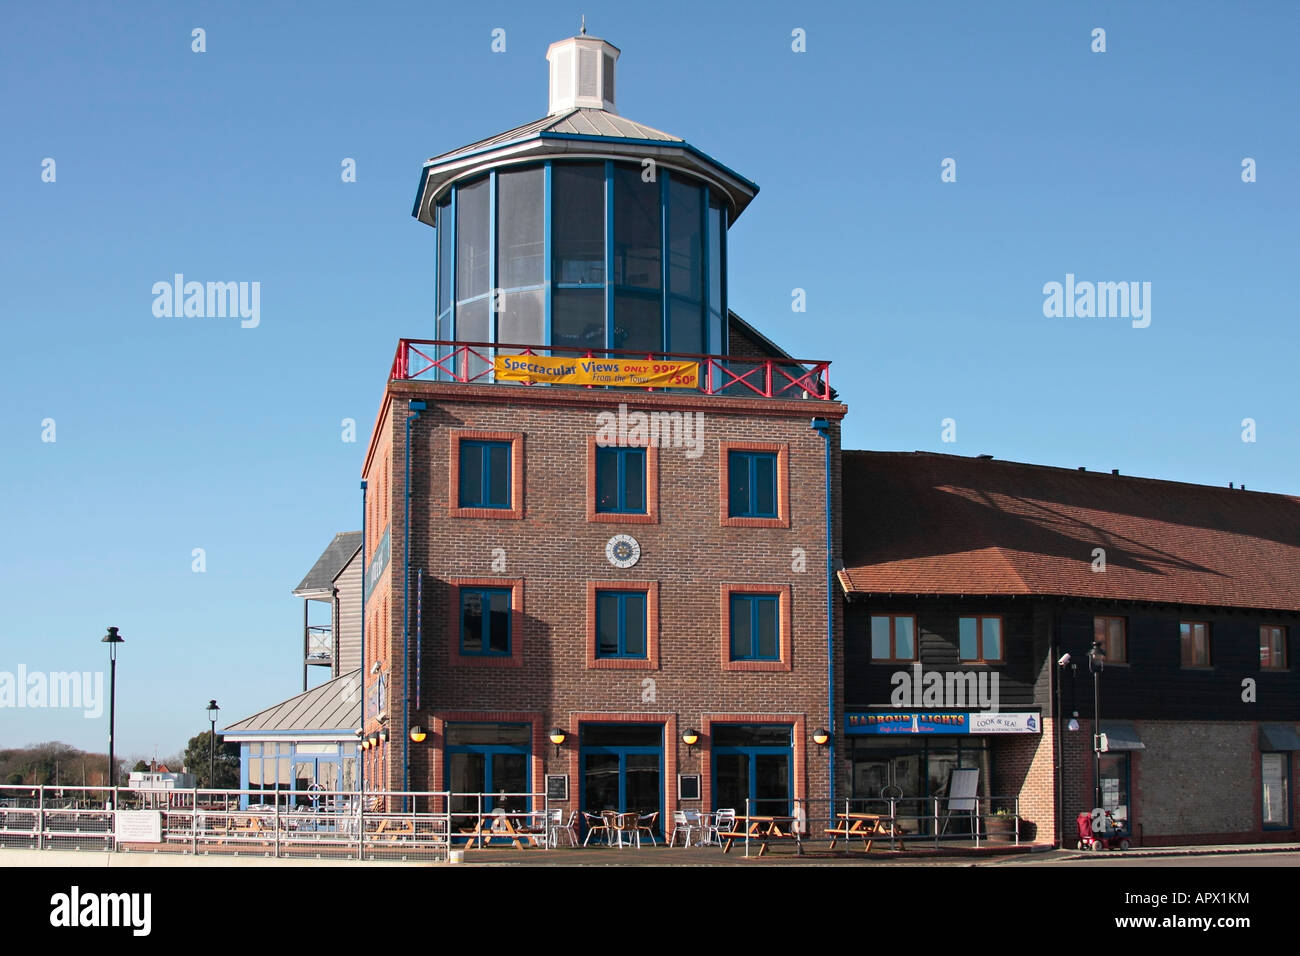 Look and Sea Visitor Centre, Littlehampton, West Sussex, UK Stock Photo